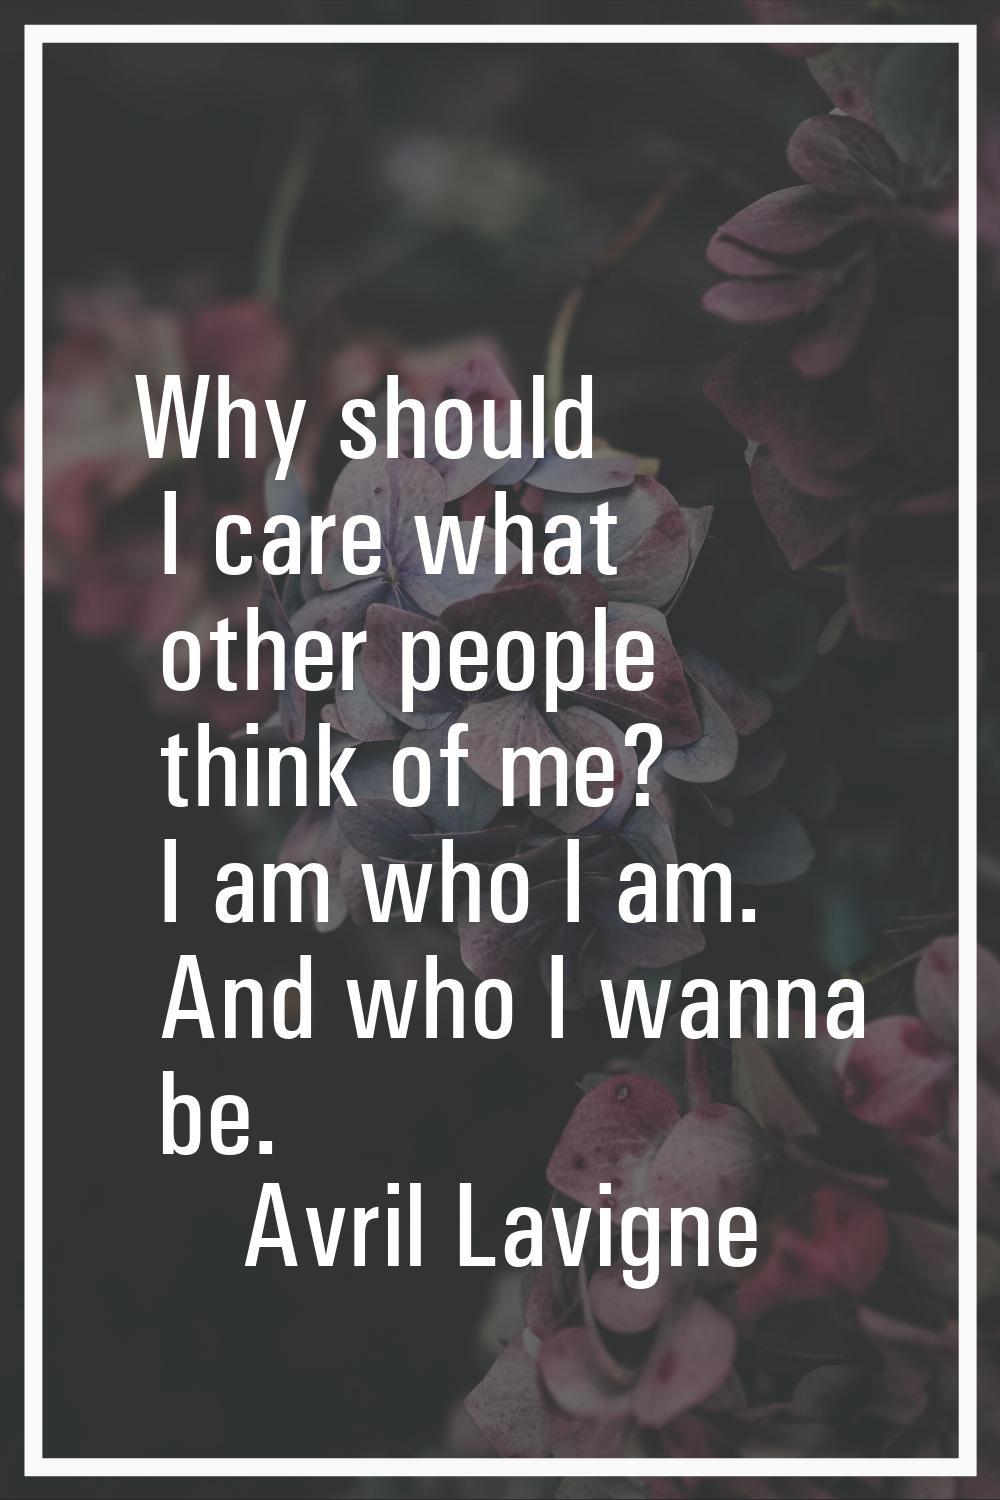 Why should I care what other people think of me? I am who I am. And who I wanna be.